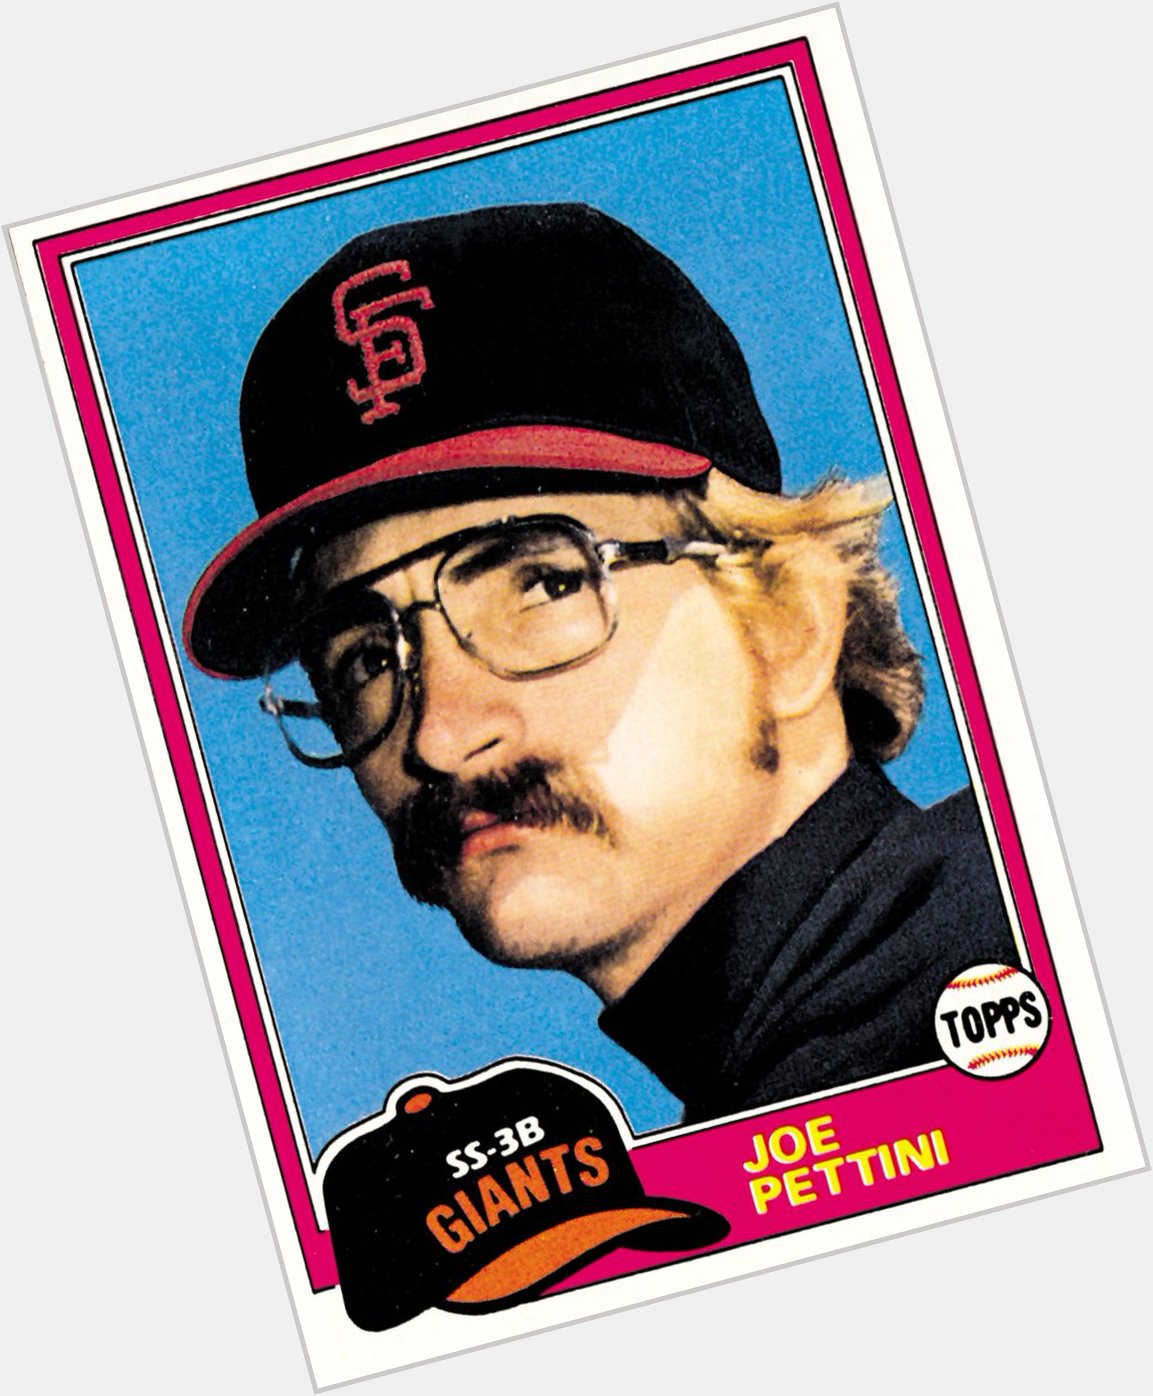 Happy 65th birthday to Joe Pettini, one of the legions who helped build the legend. 